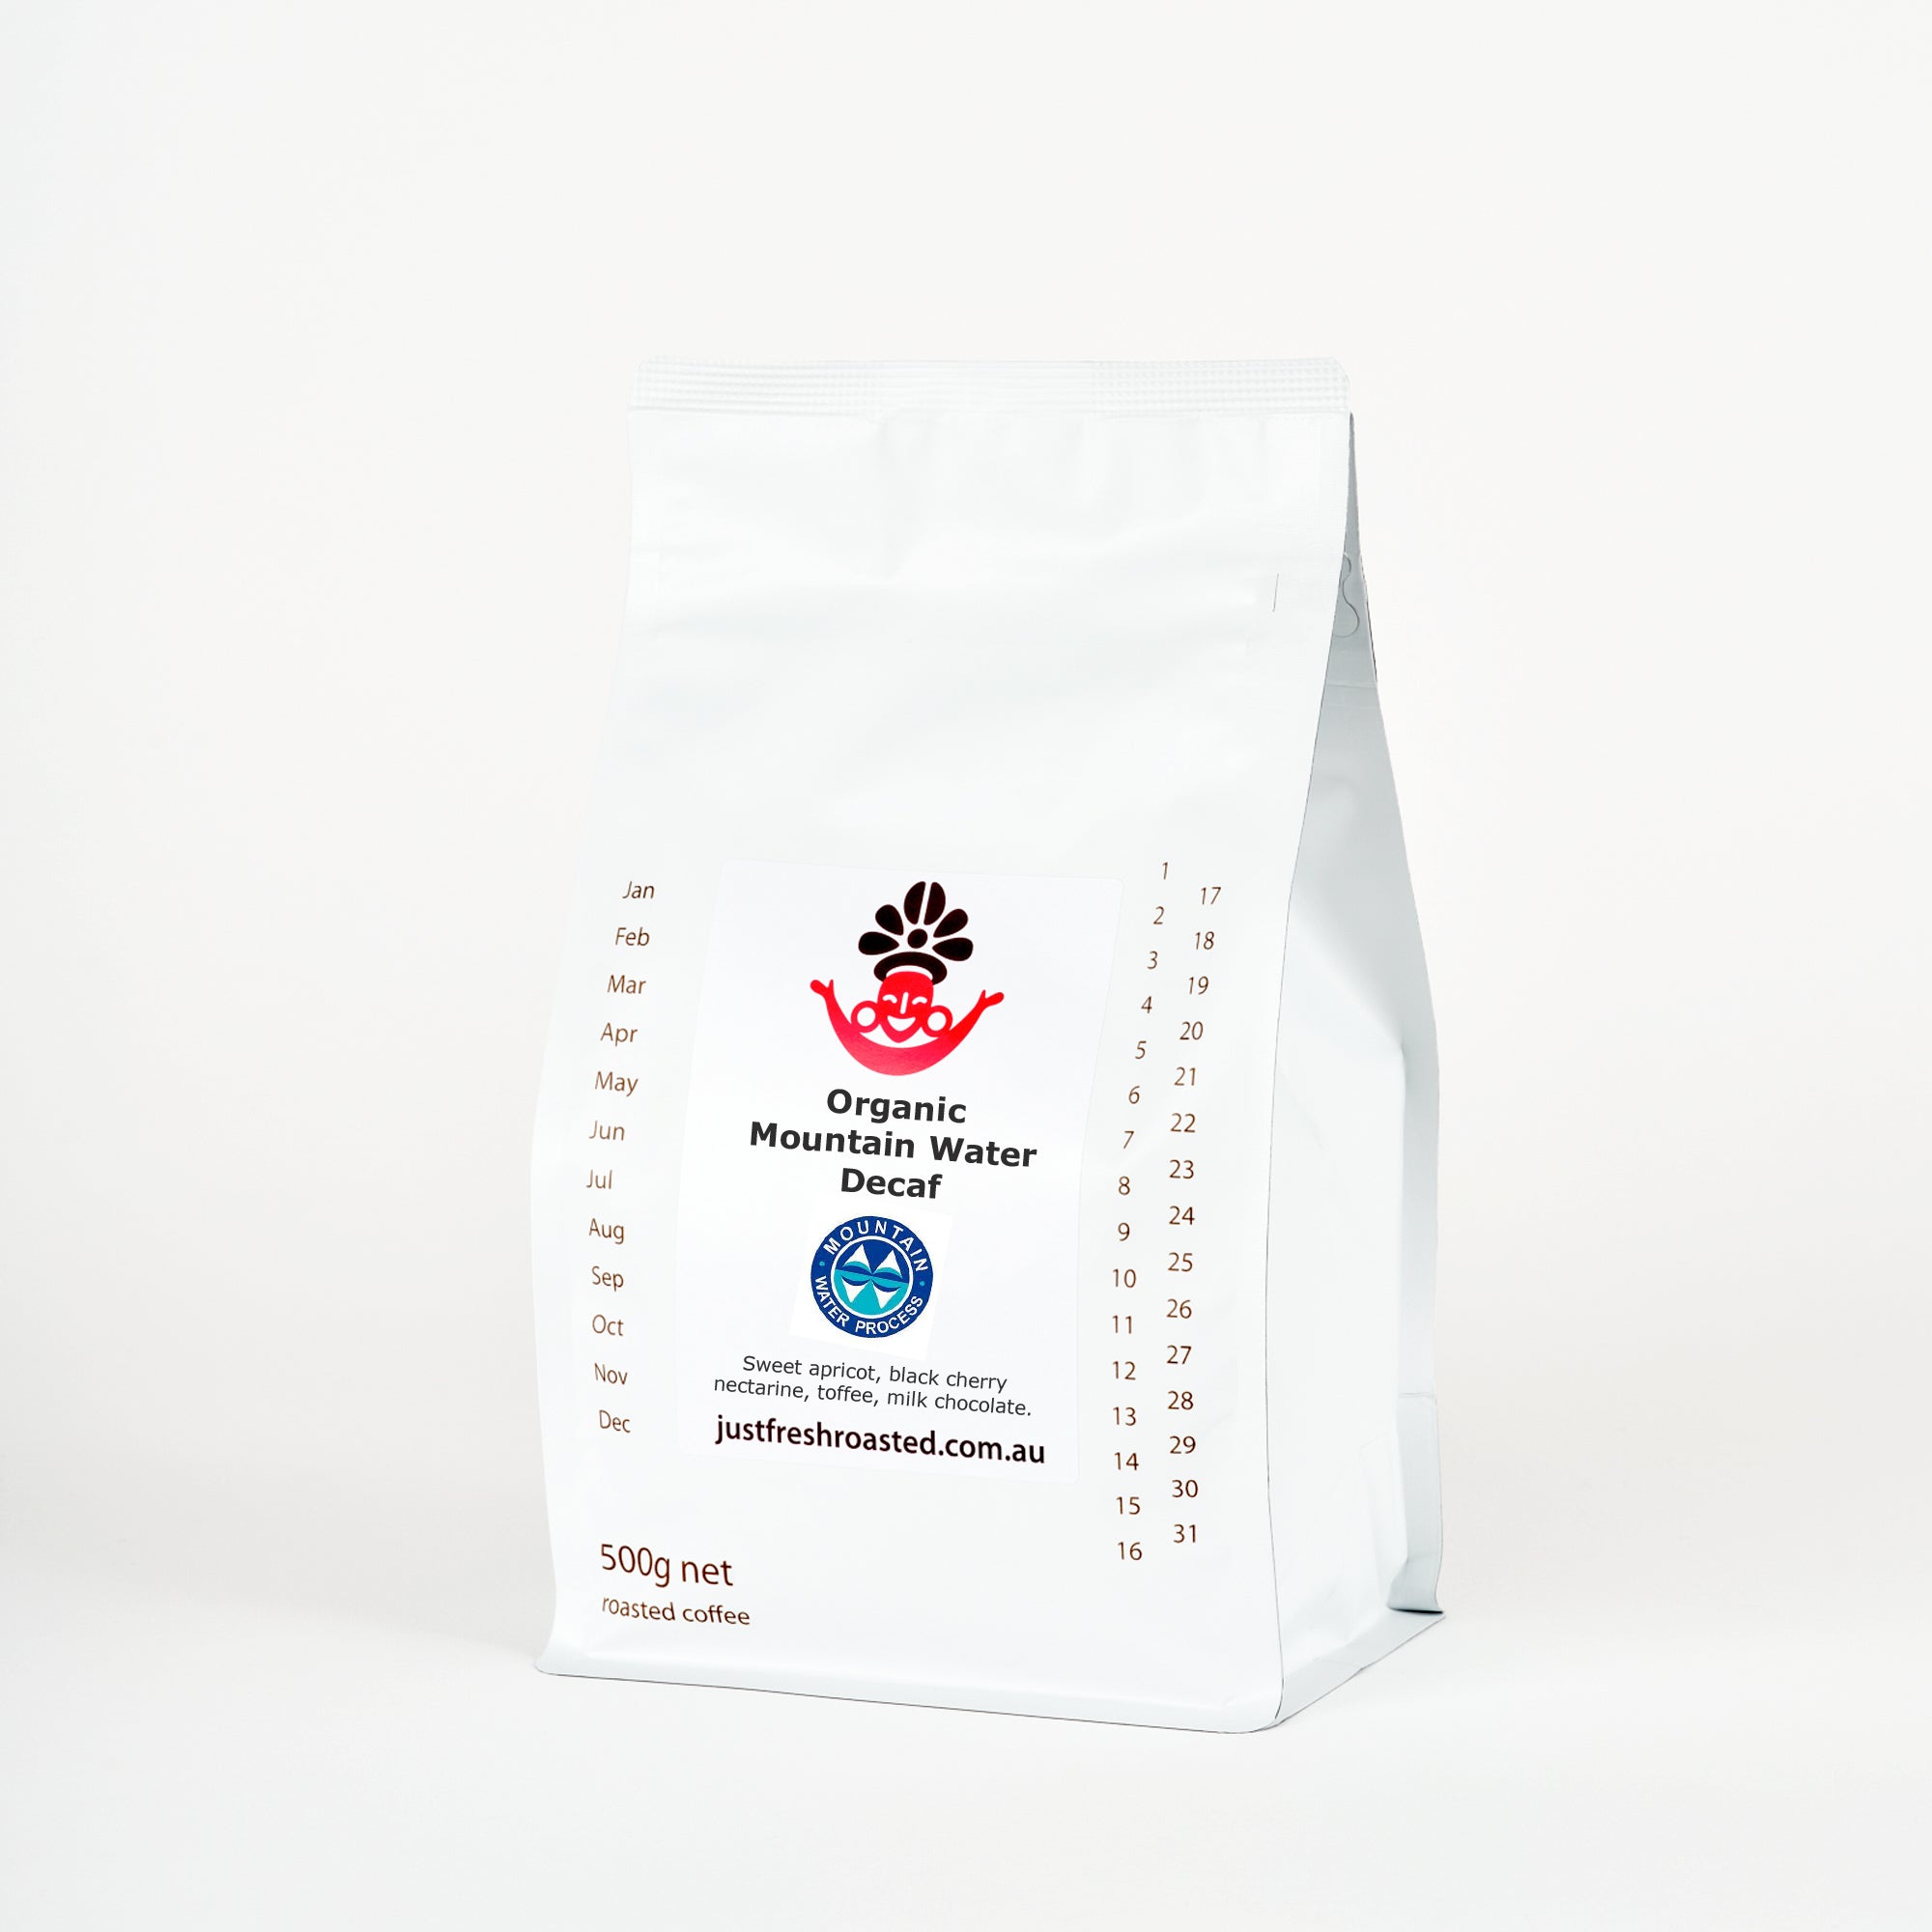 500g pack of fresh roasted Mountain Water Organic Decaf coffee